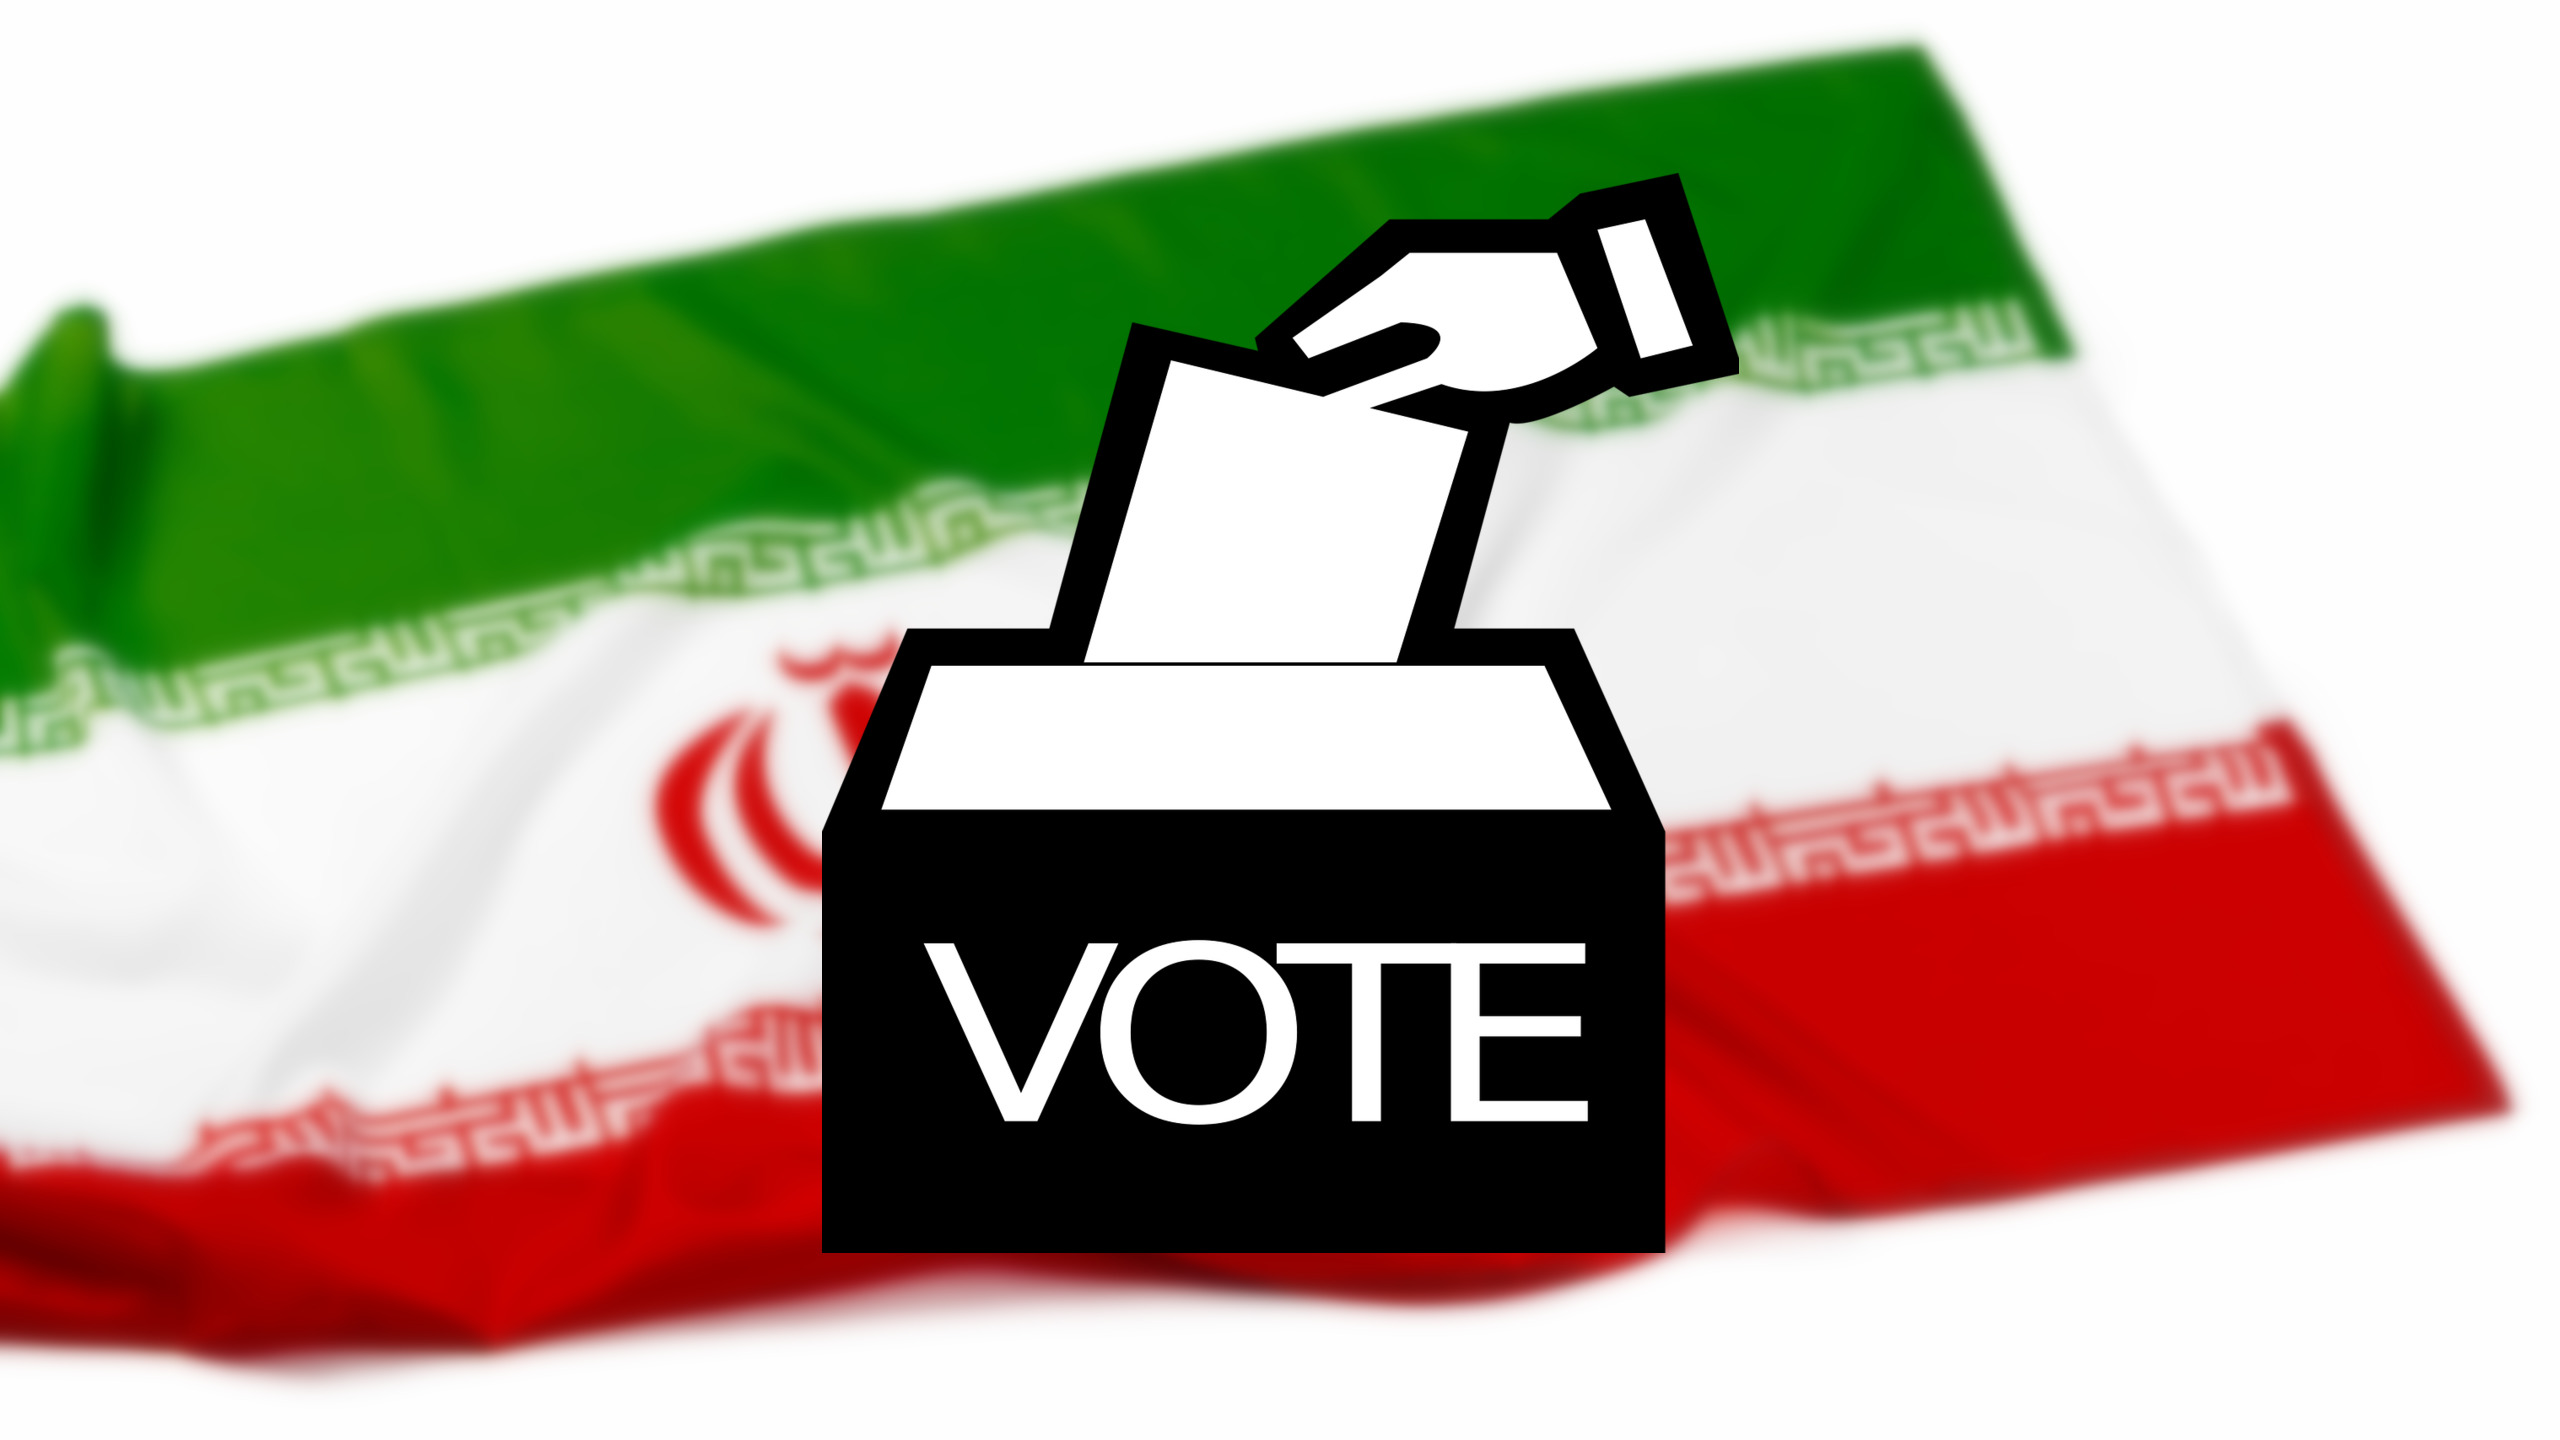 Calling All Iranian Presidential Candidates, Moderates Need Not Apply